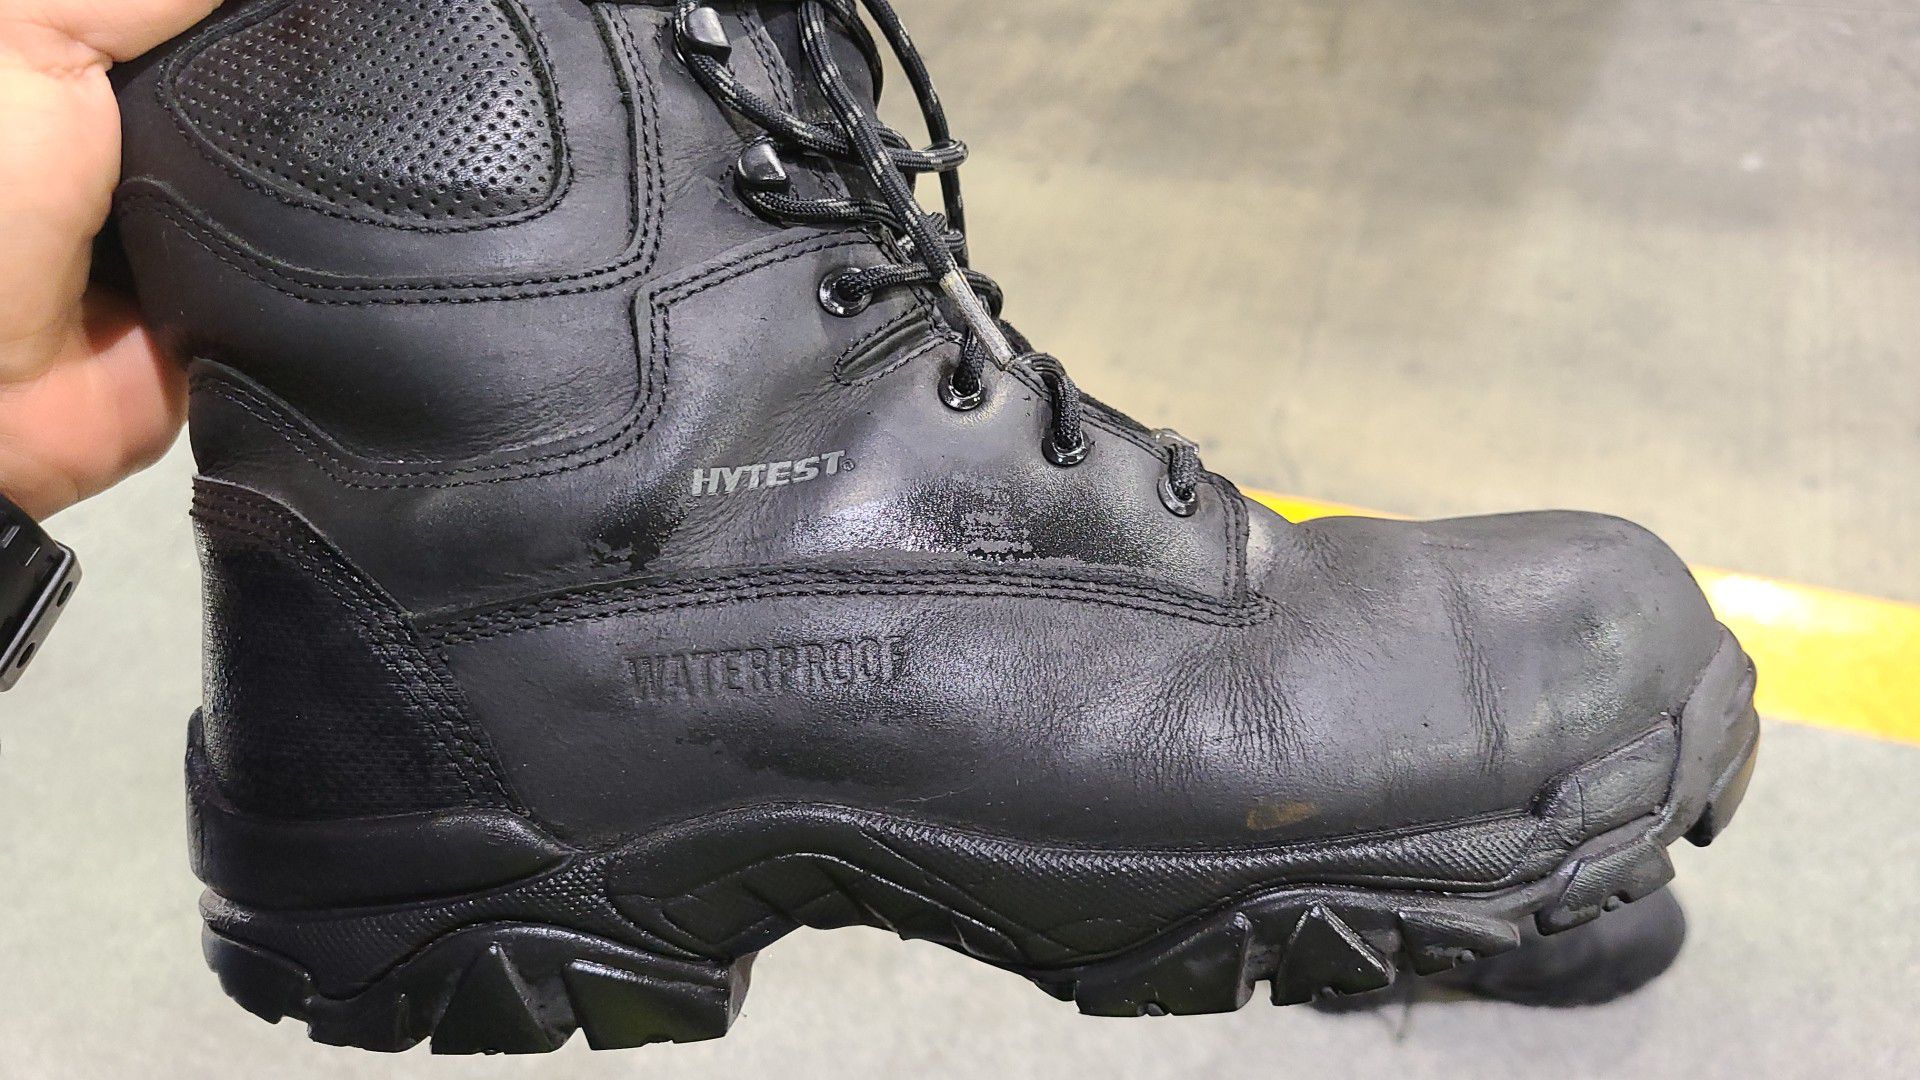 HYTEST work boots. Great condition 3M great boots